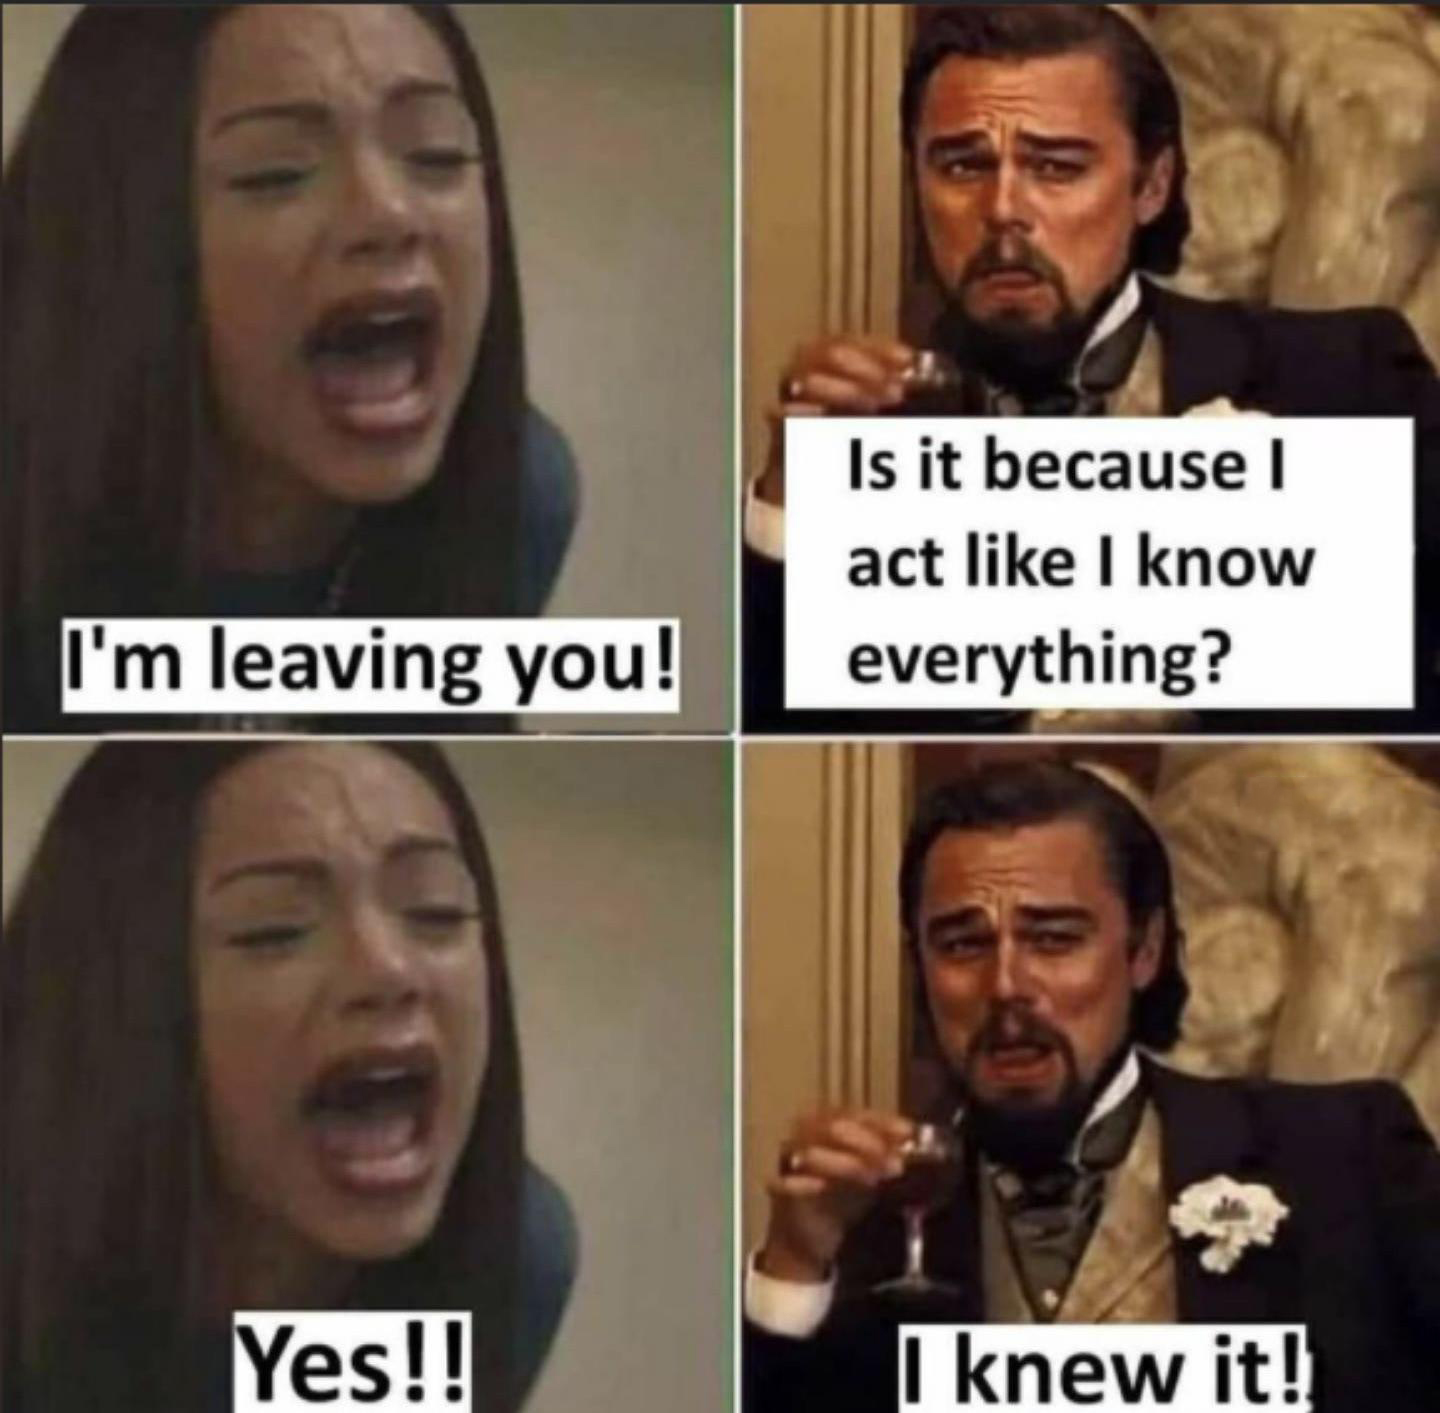 funny memes - dank memes - im leaving you is it because i act like i know everything - Is it because act I know everything? I'm leaving you! Yes!! I knew it!